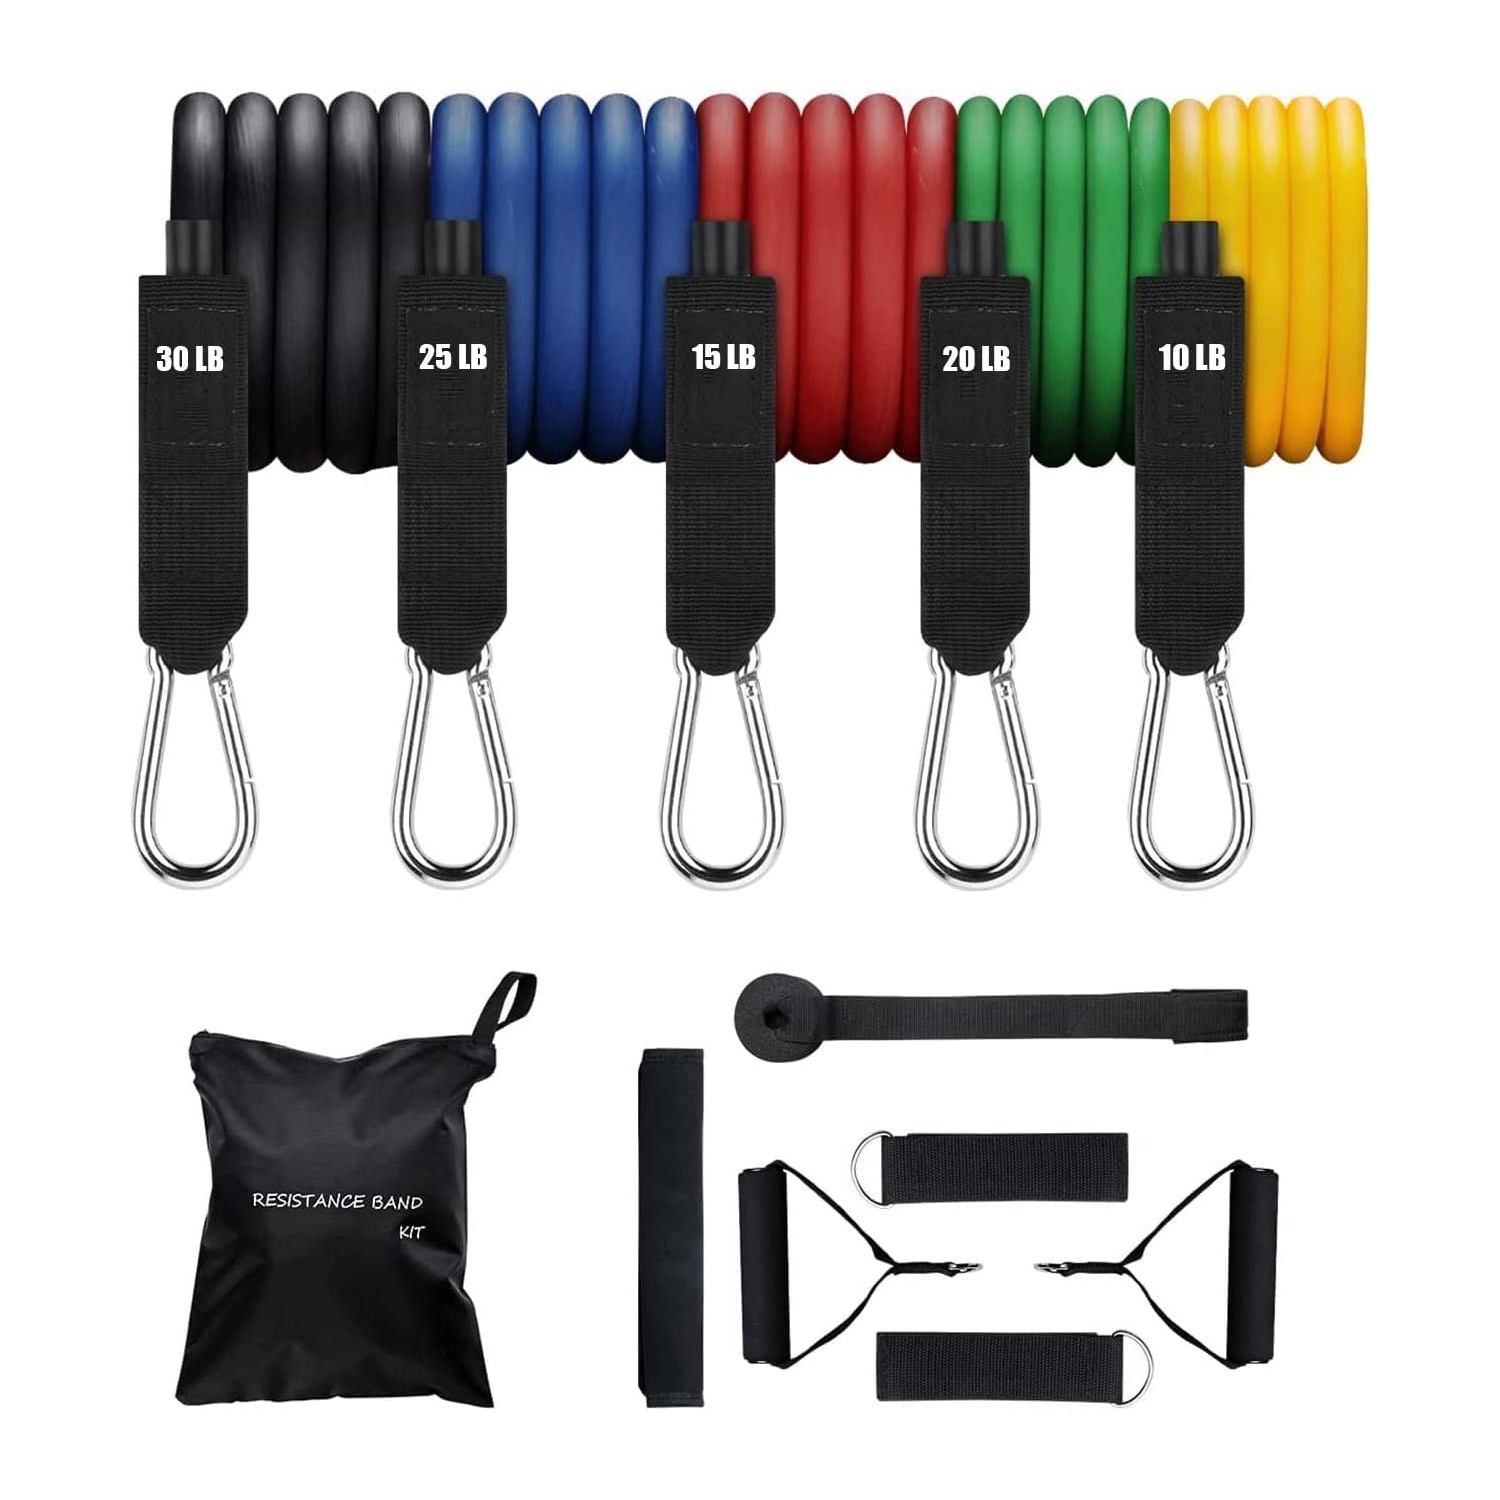 Upgraded Door Anchor Strap for Resistance Bands Exercises Portable Door Band Resistance Workout Equipment Multi Point Anchor Gym Attachment for Home Fitness Easy to Install 